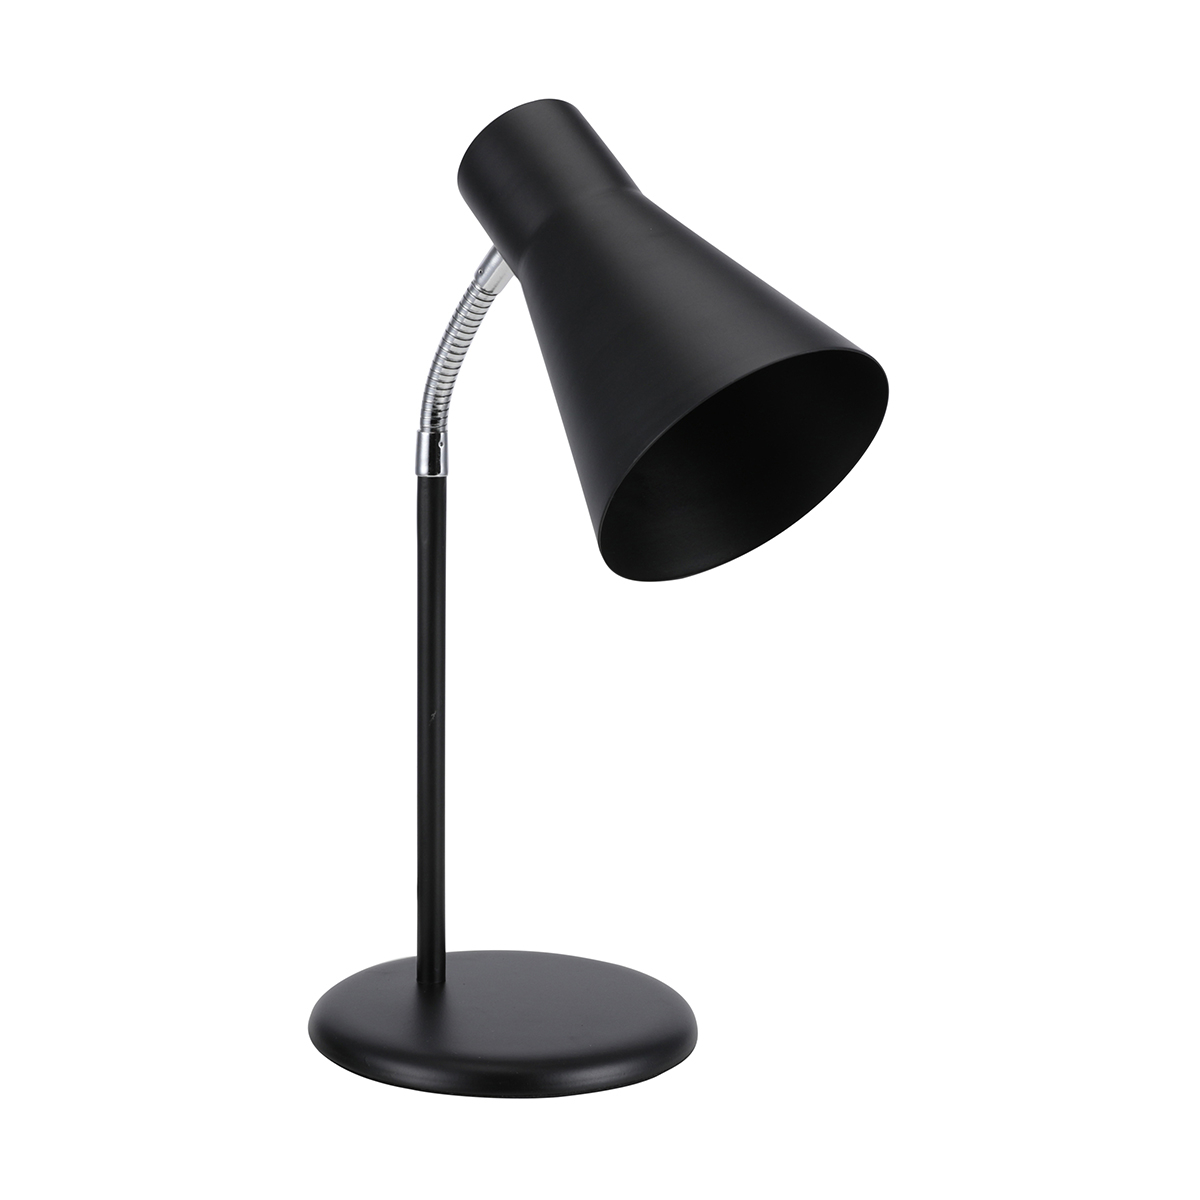 Best Desk Lamp Wirecutter Stylish Small With Shade Tiny within sizing 1200 X 1200